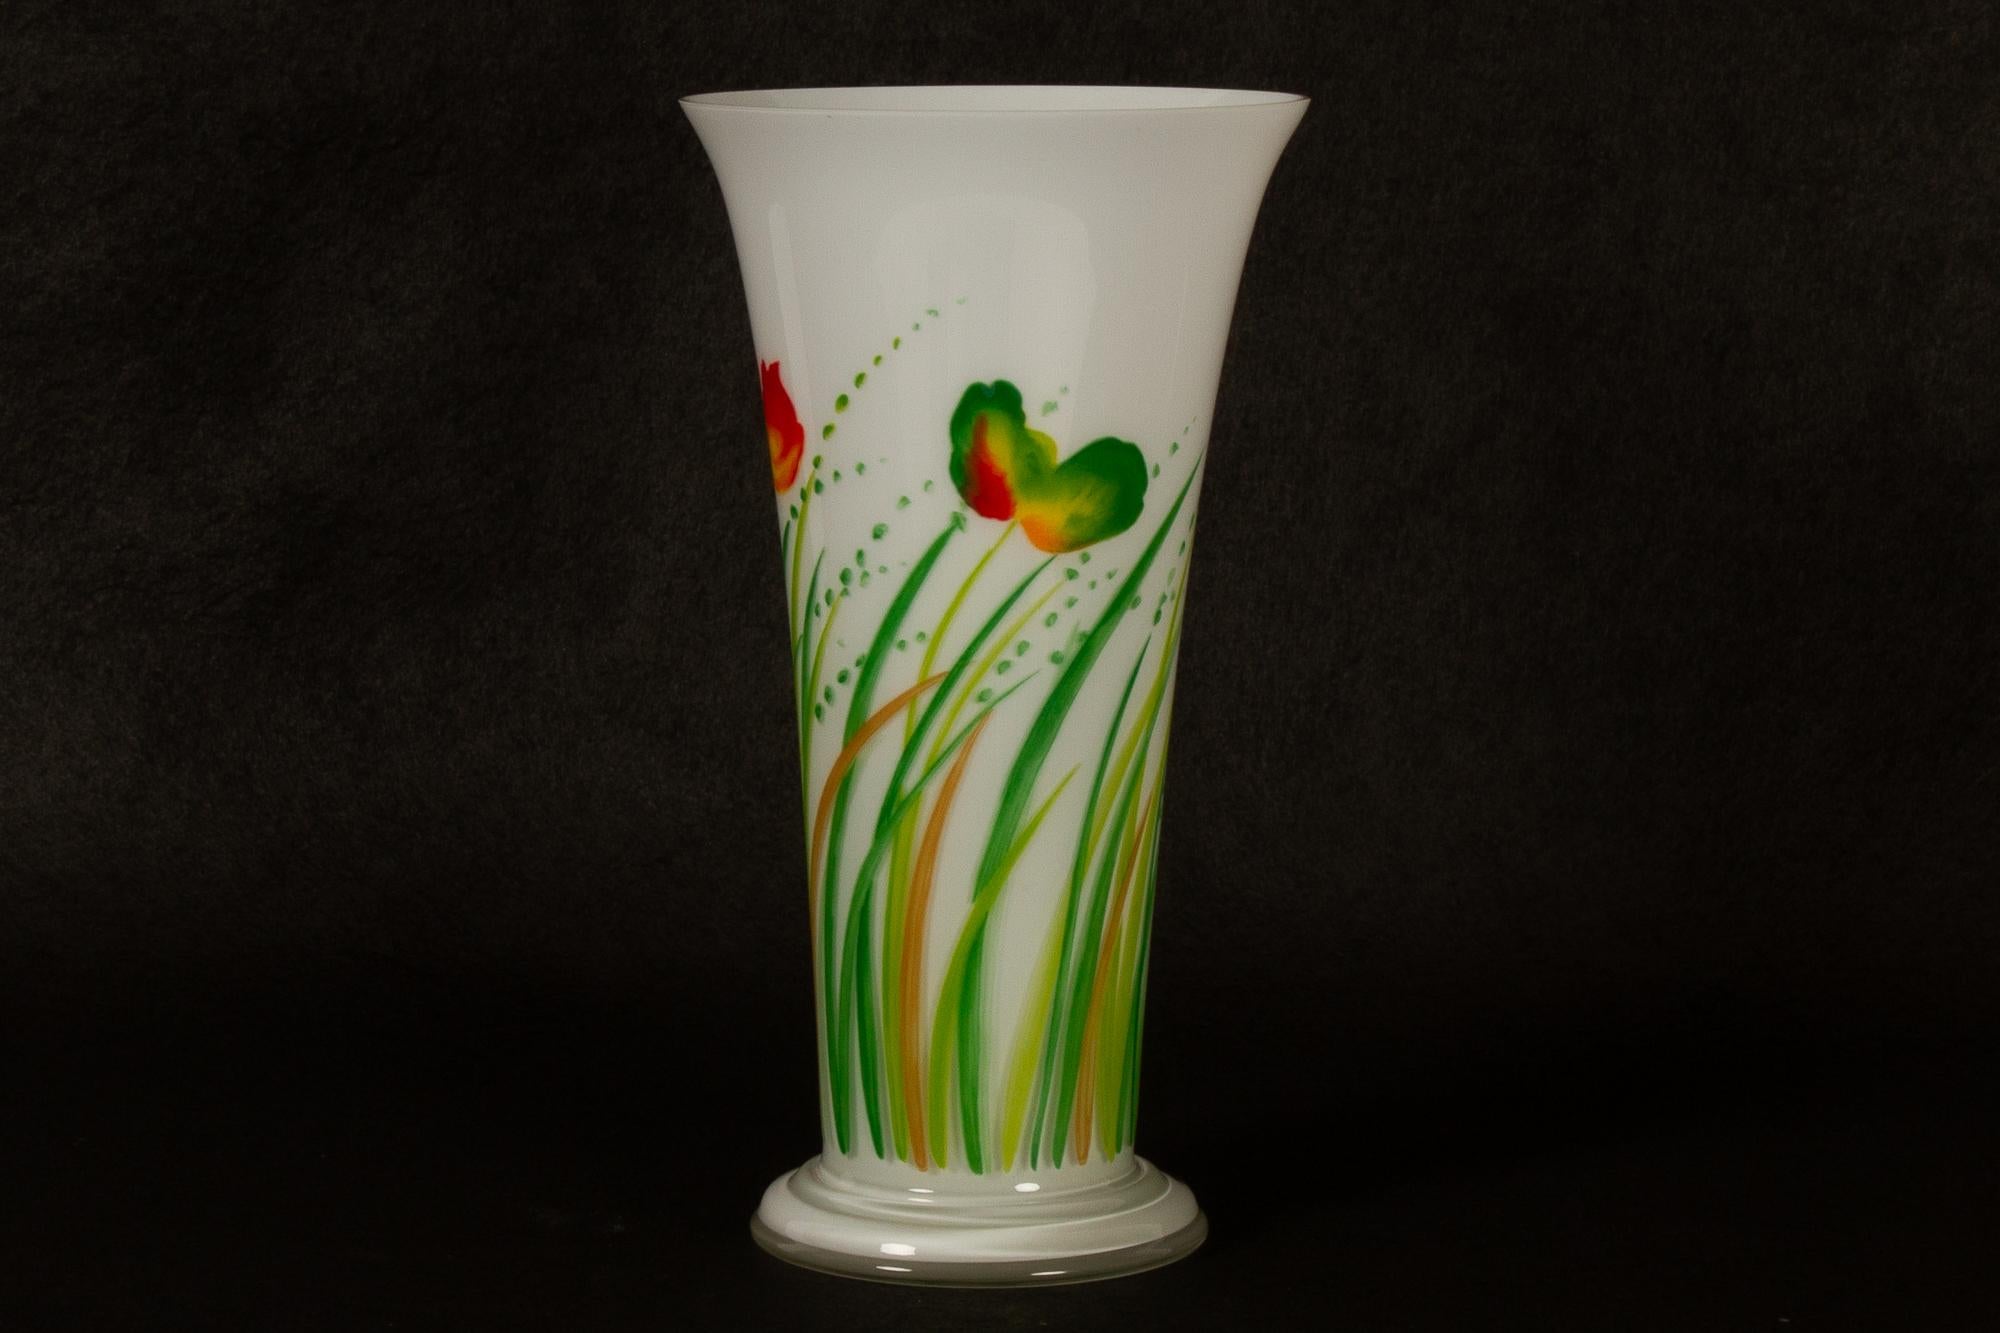 Danish glass vase by Ole Kortzau for Holmegaard 1978.
Tall glass vase designed by Danish artist Ole Kortzau and made by Danish glassworks Holmegaard. This model was only produced in a limited period around 1978. Height 29.5 cm.
Very good